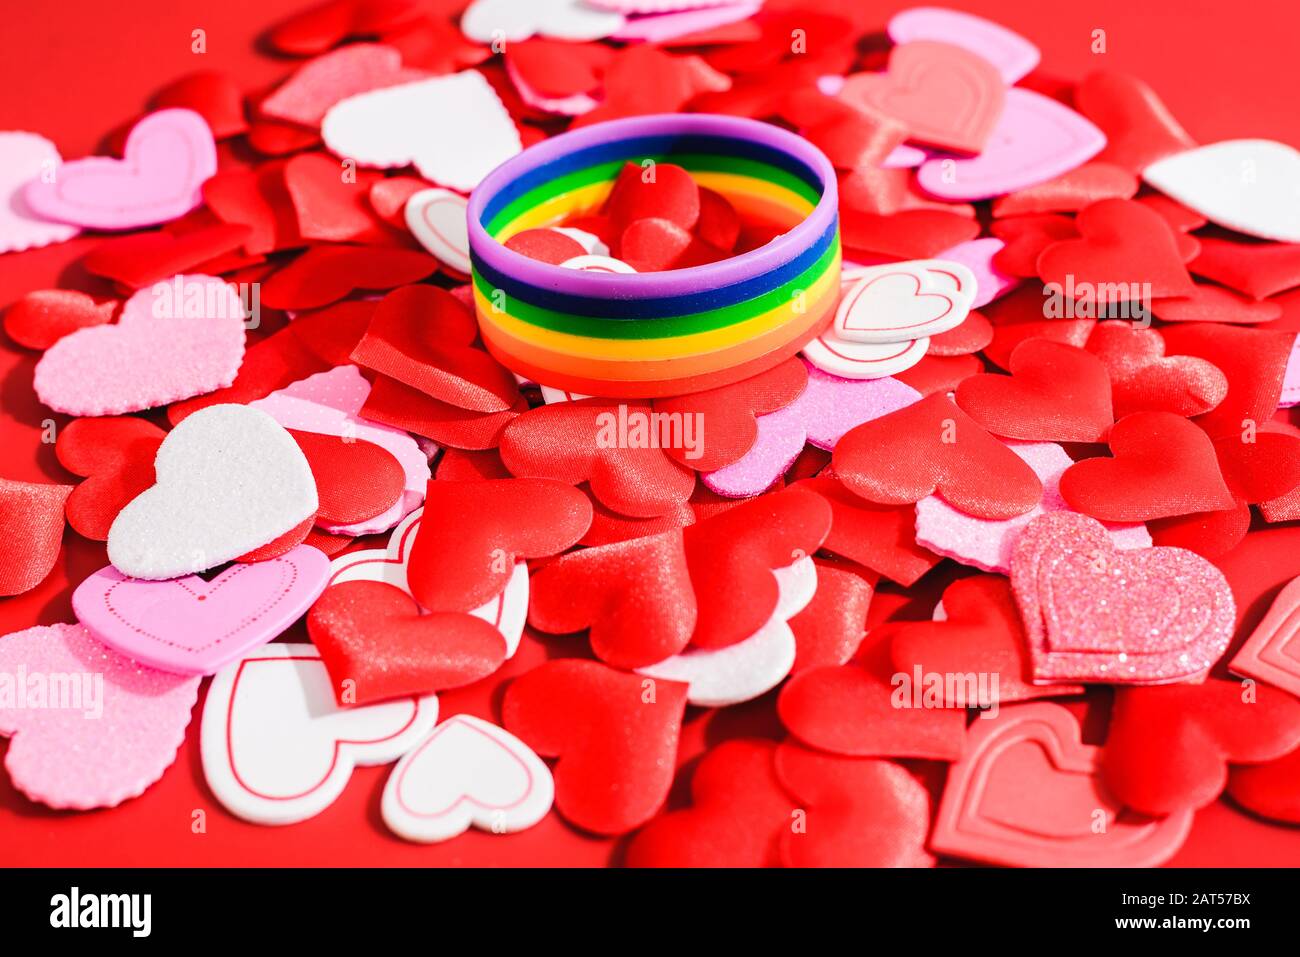 Romantic background for valentines of red hearts for gay couples in love. Stock Photo